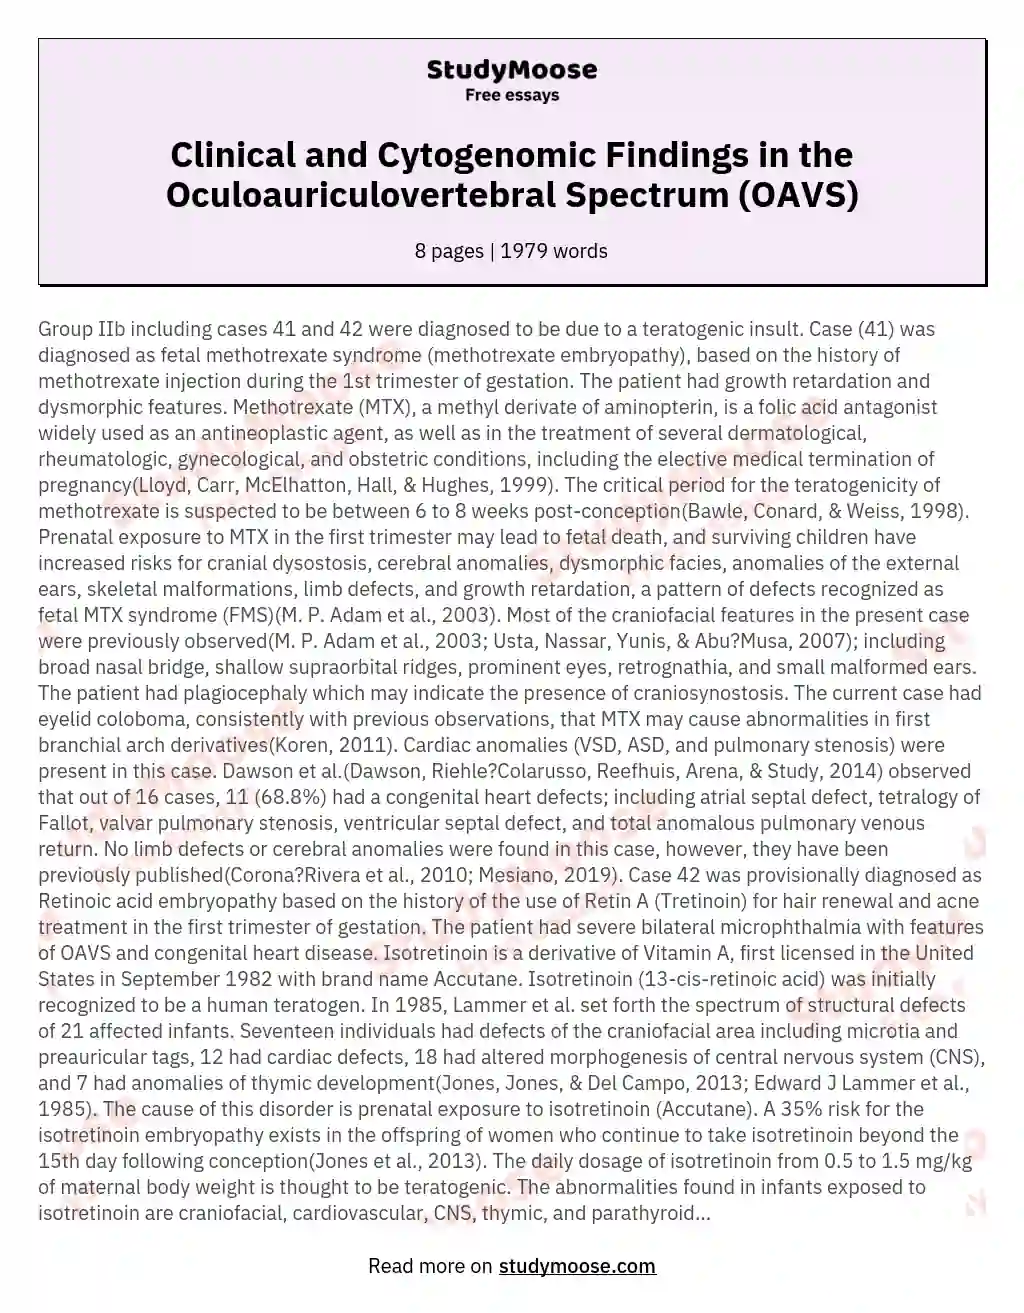 Clinical and Cytogenomic Findings in the Oculoauriculovertebral Spectrum (OAVS) essay